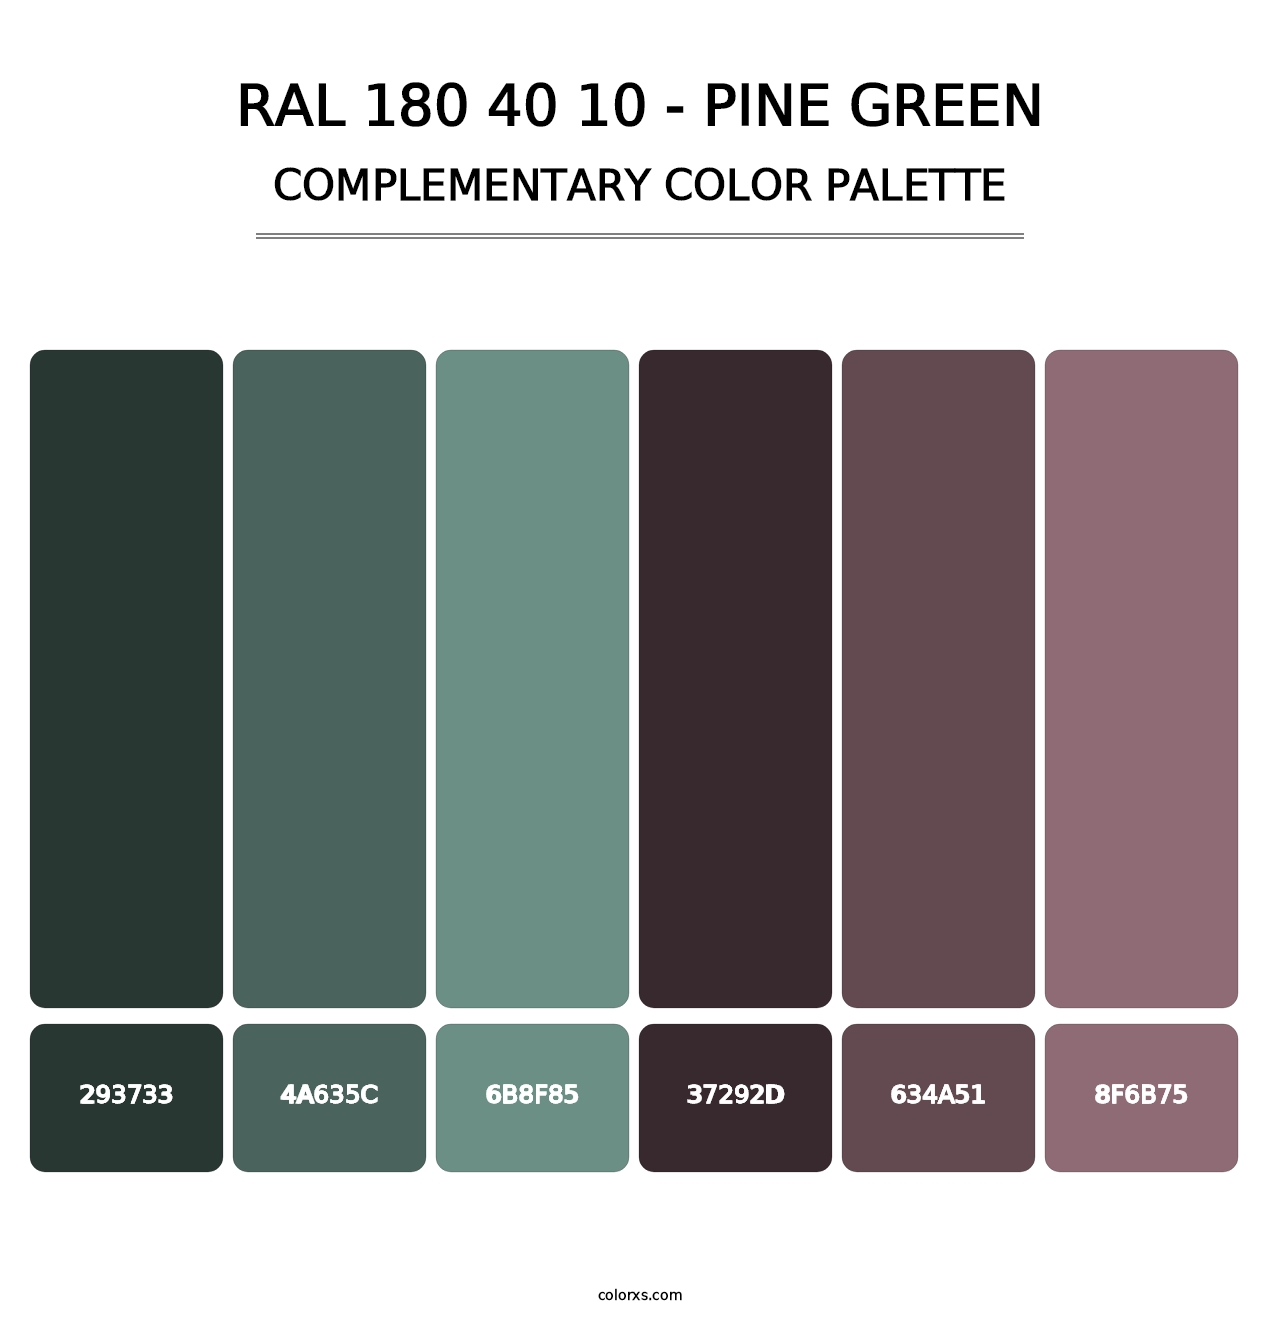 RAL 180 40 10 - Pine Green - Complementary Color Palette